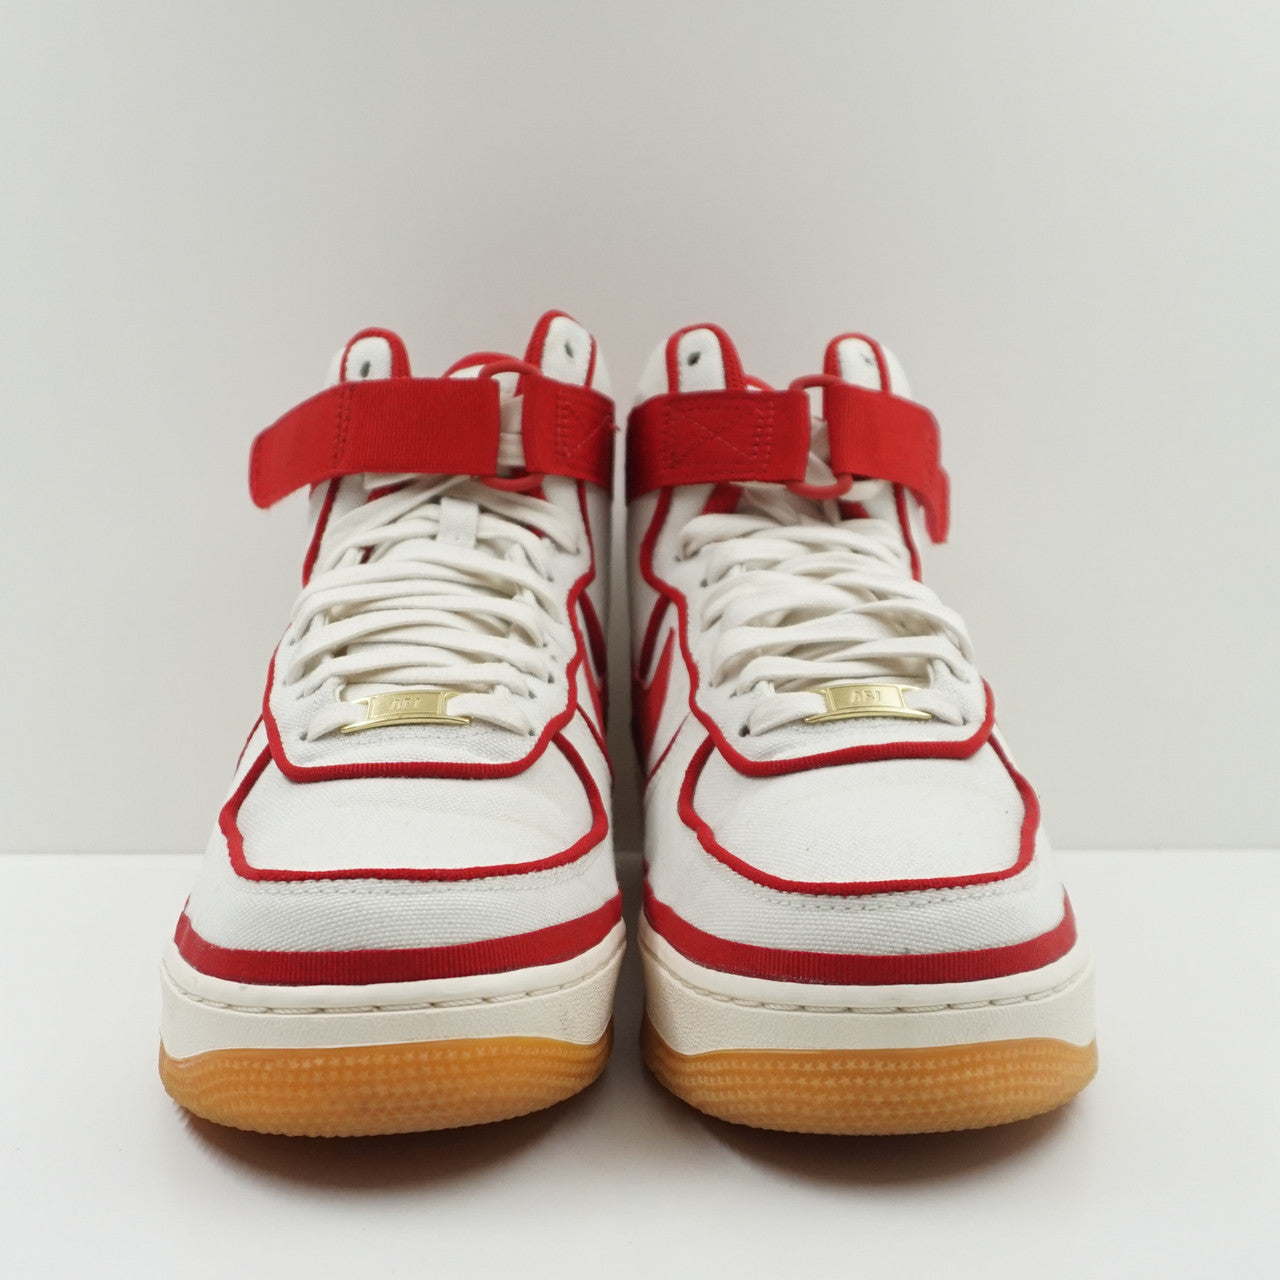 Shoes Nike Air Force 1 High 07 LV8 Gym Red • shop